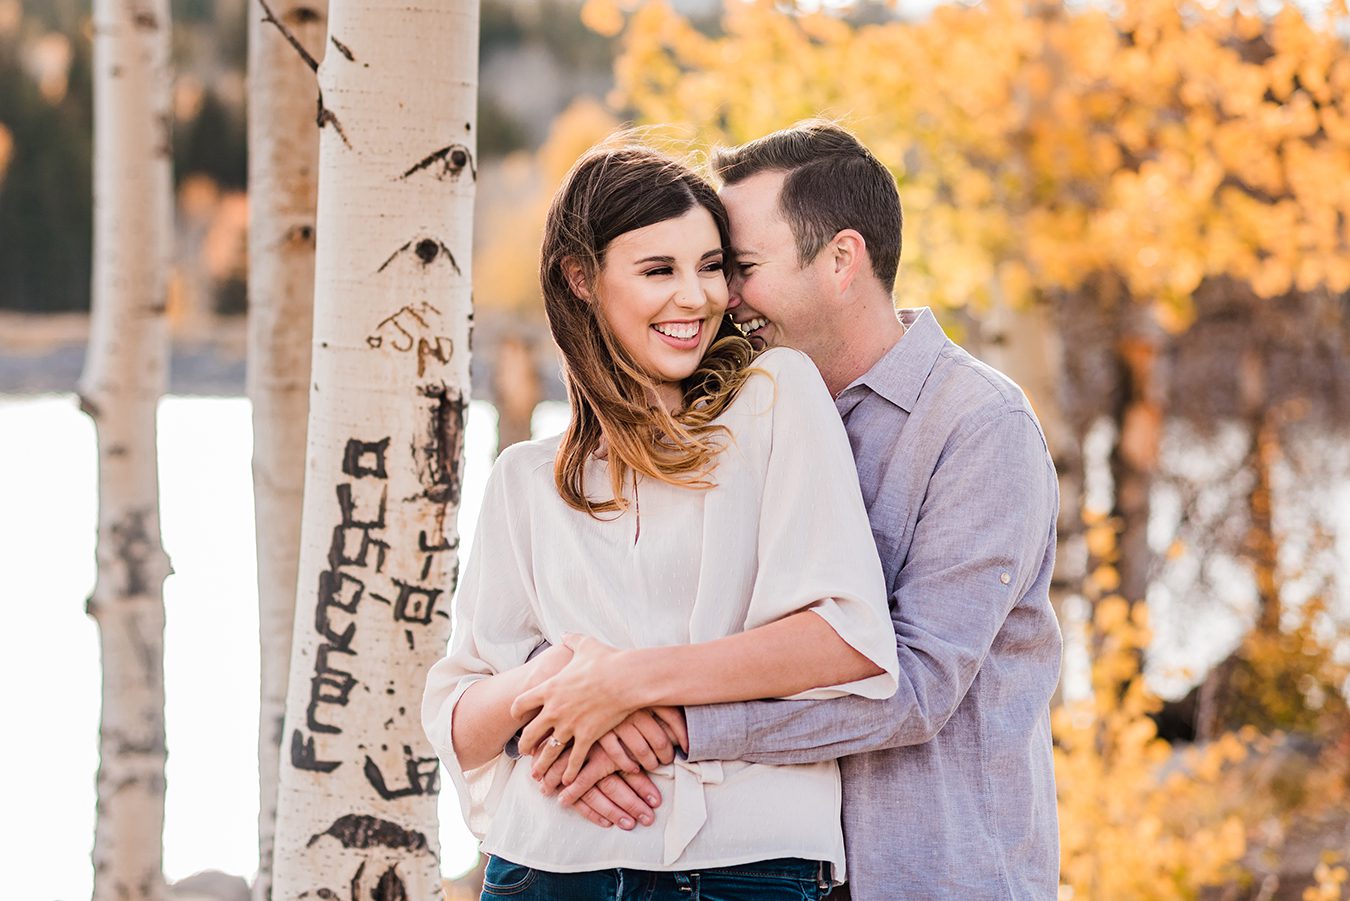 Molly and Connor's Color Sunday engagement session on the Mesa | amanda.matilda.photography